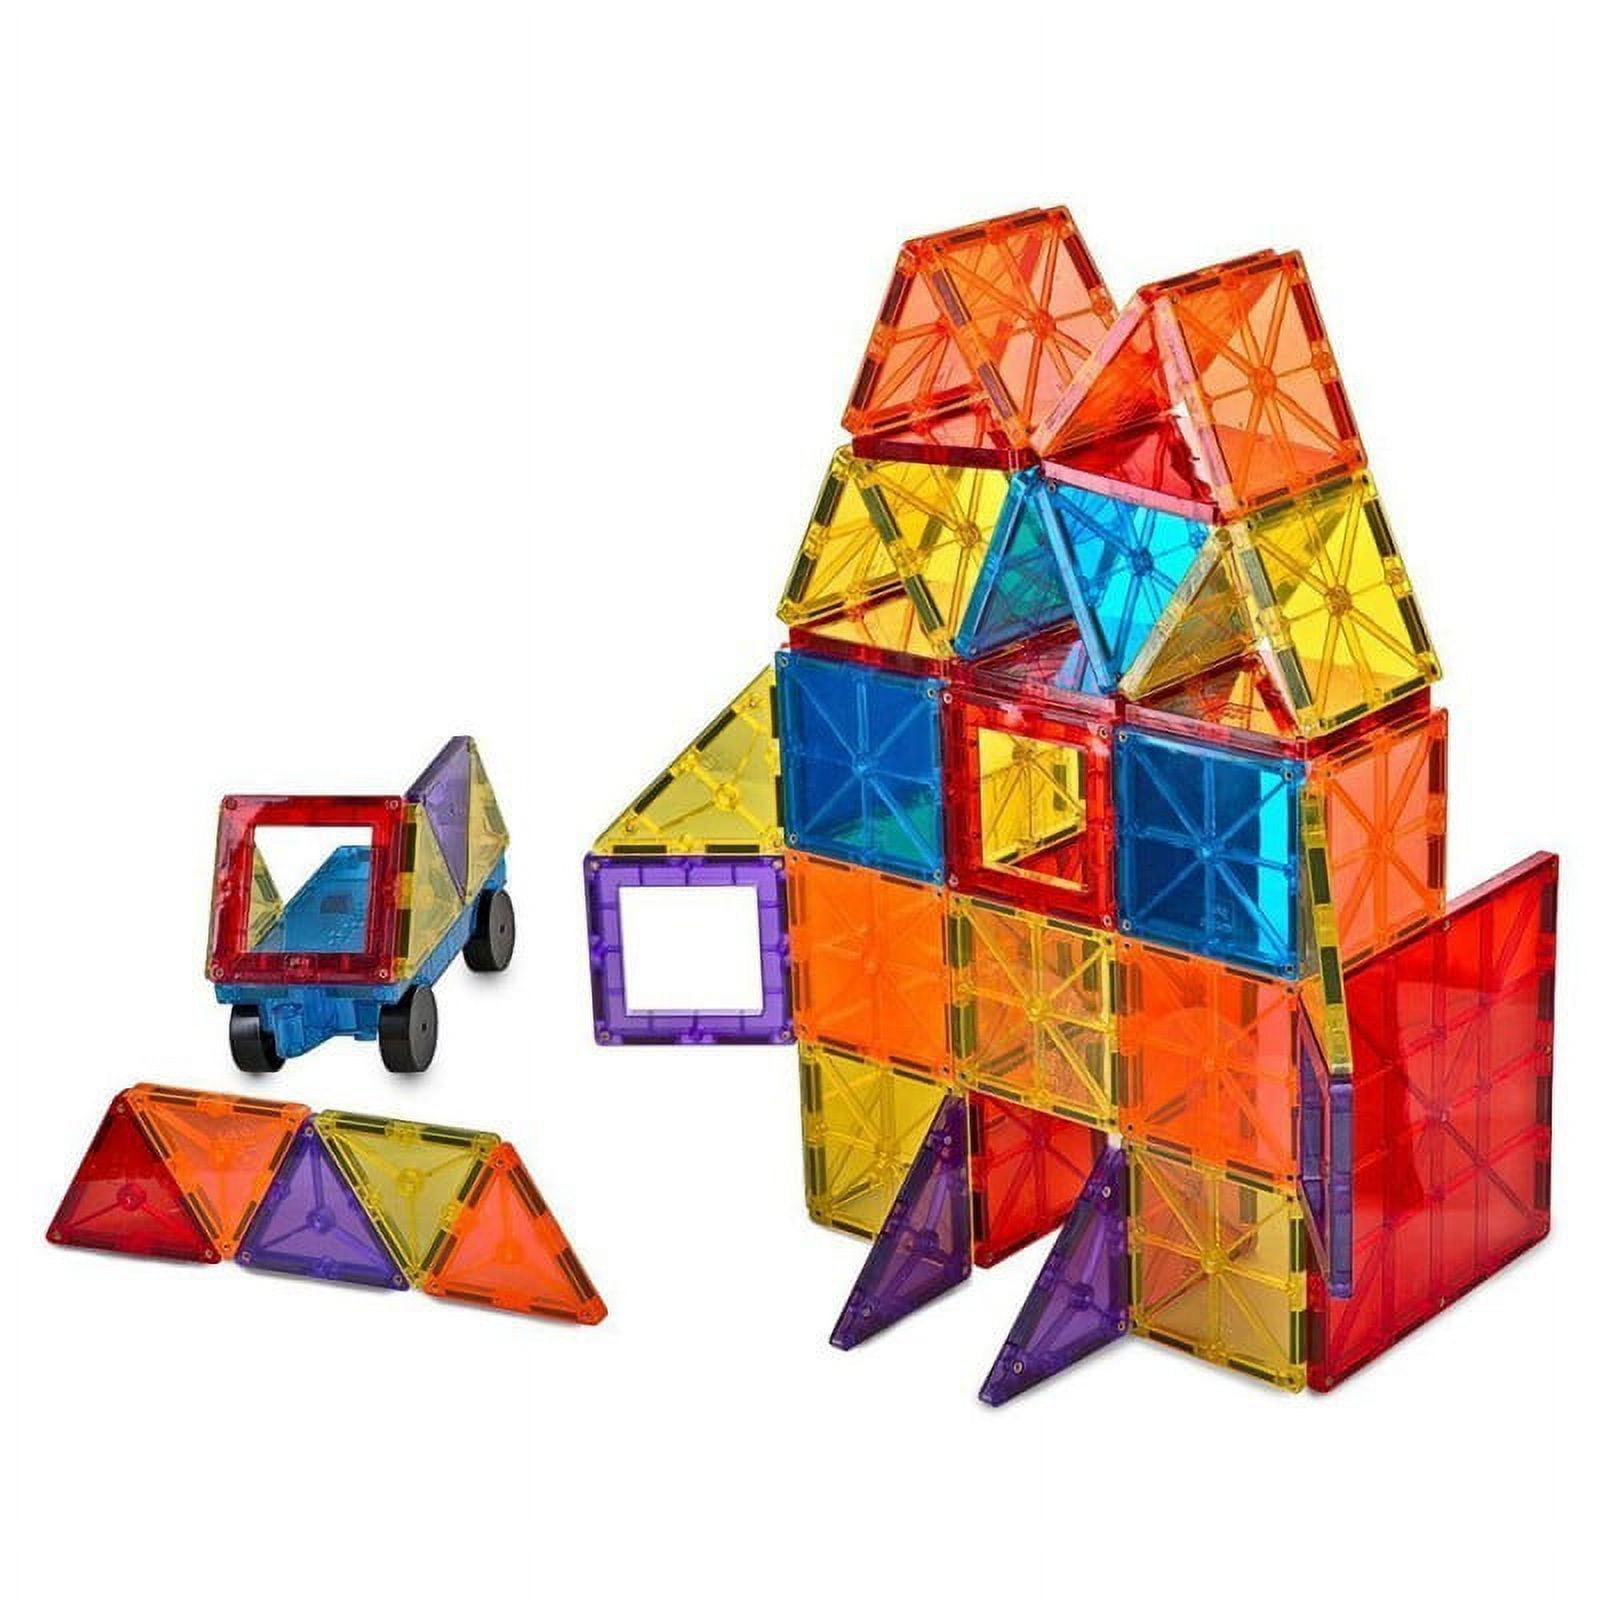 Cra-Z-Art: MagnaDoodle Magnetic Drawing Toy, Ages 3+ 